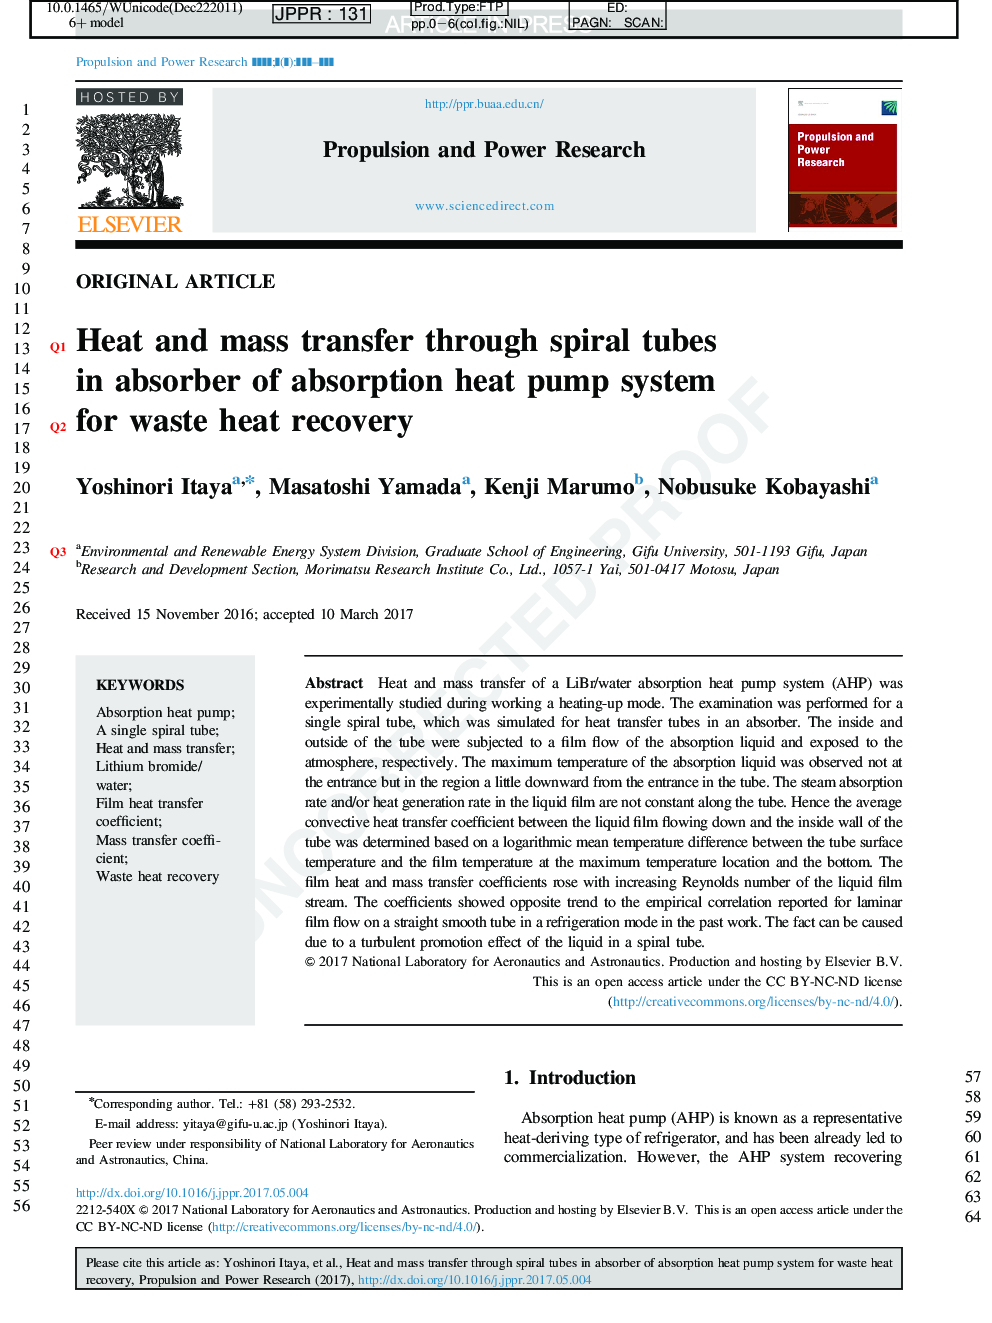 Heat and mass transfer through spiral tubes in absorber of absorption heat pump system for waste heat recovery